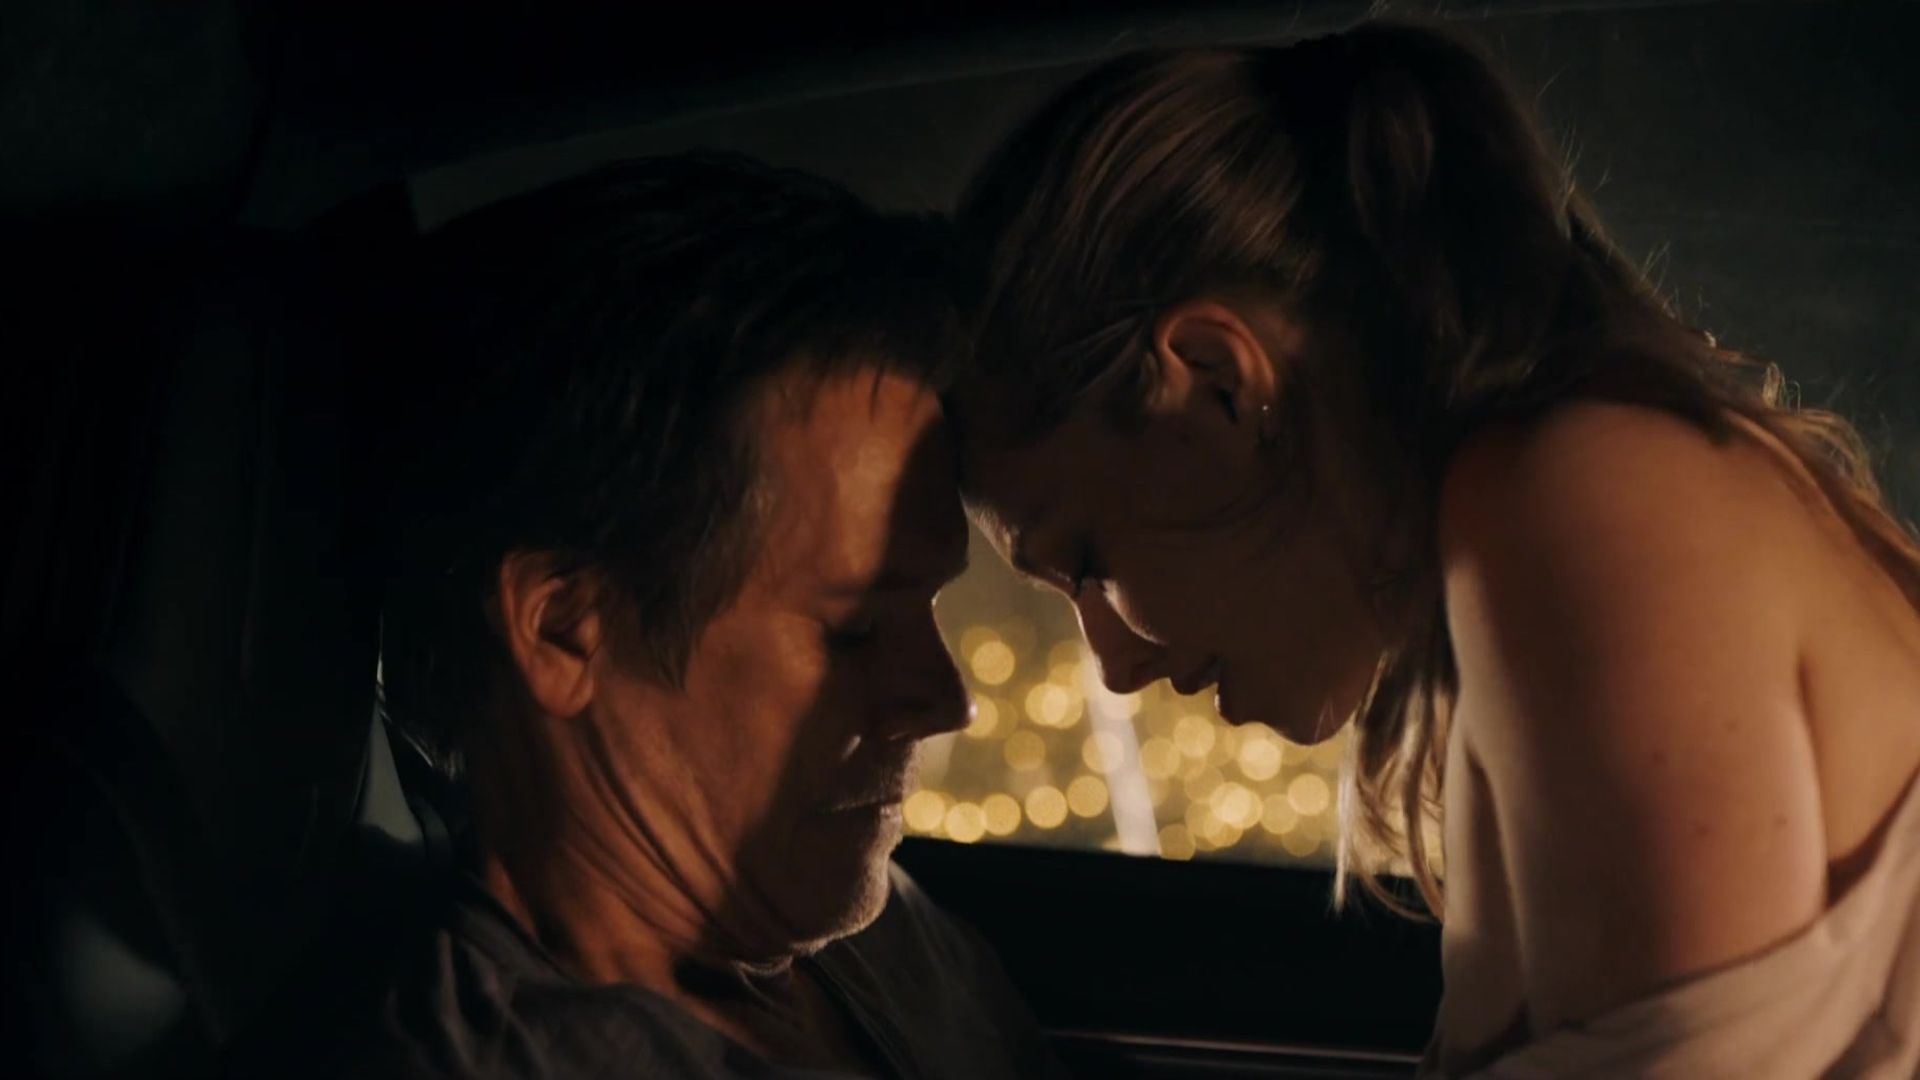 A scene from the movie 'You Should Have Left'